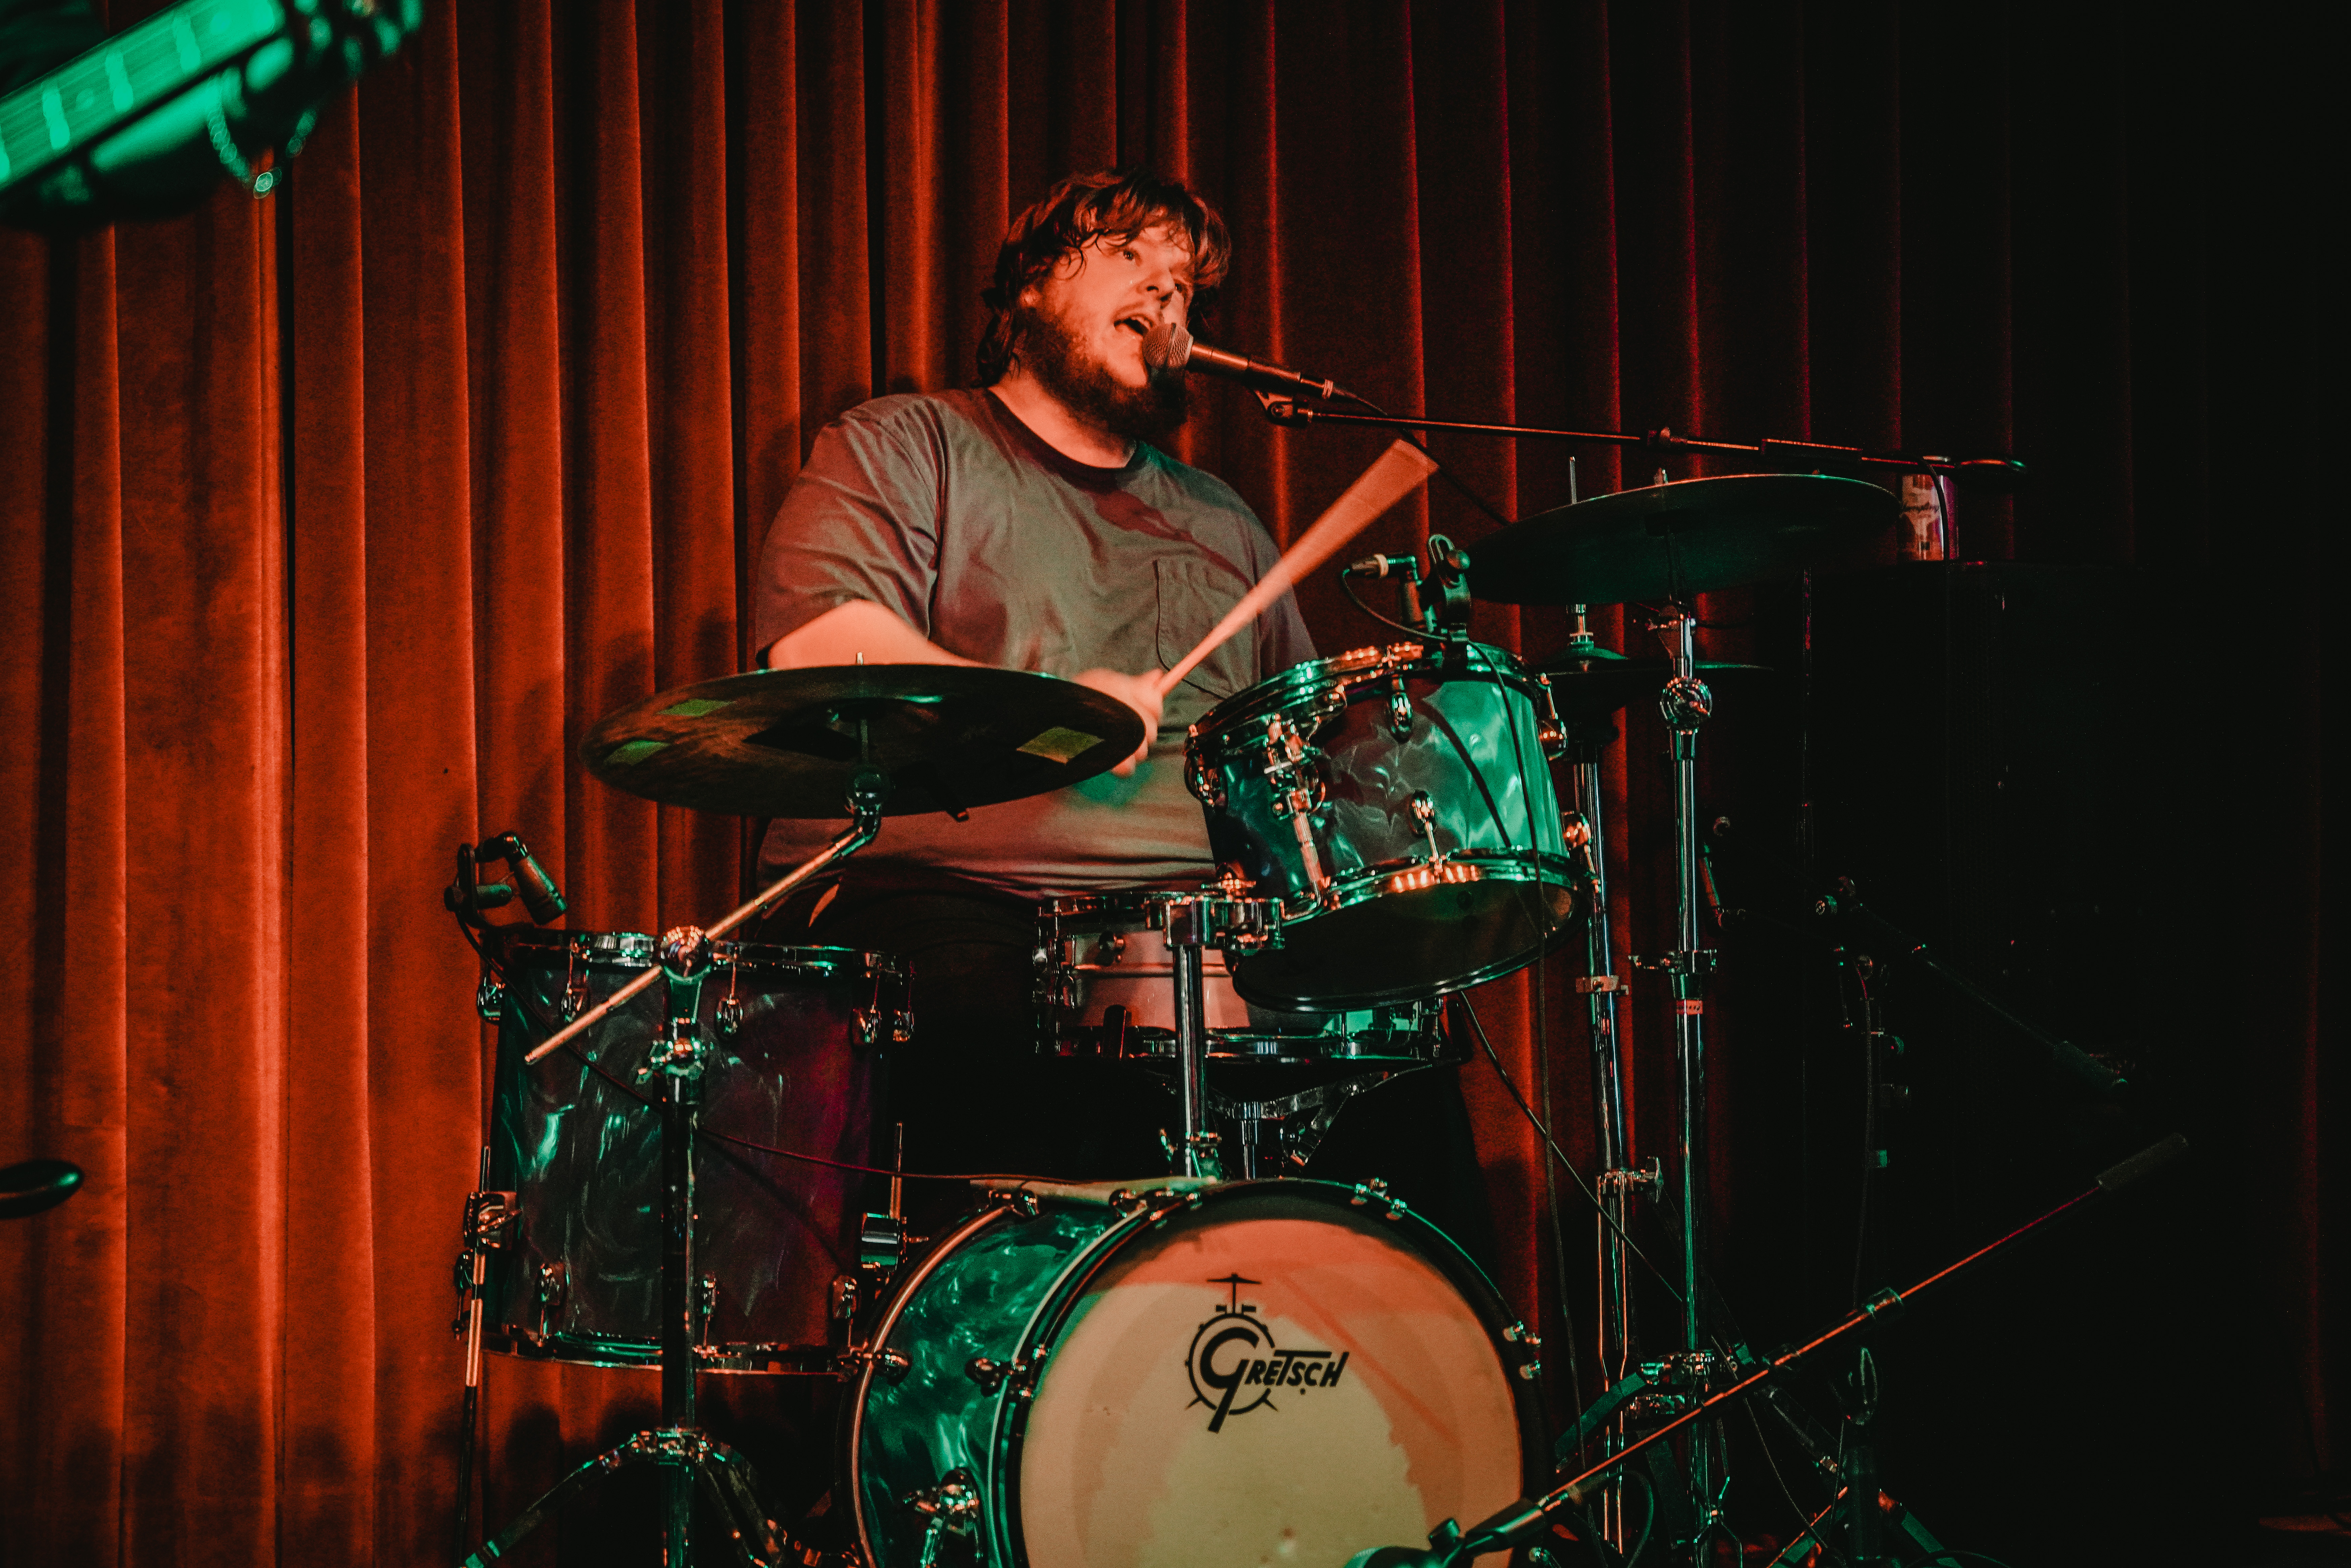 A drummer singing on stage